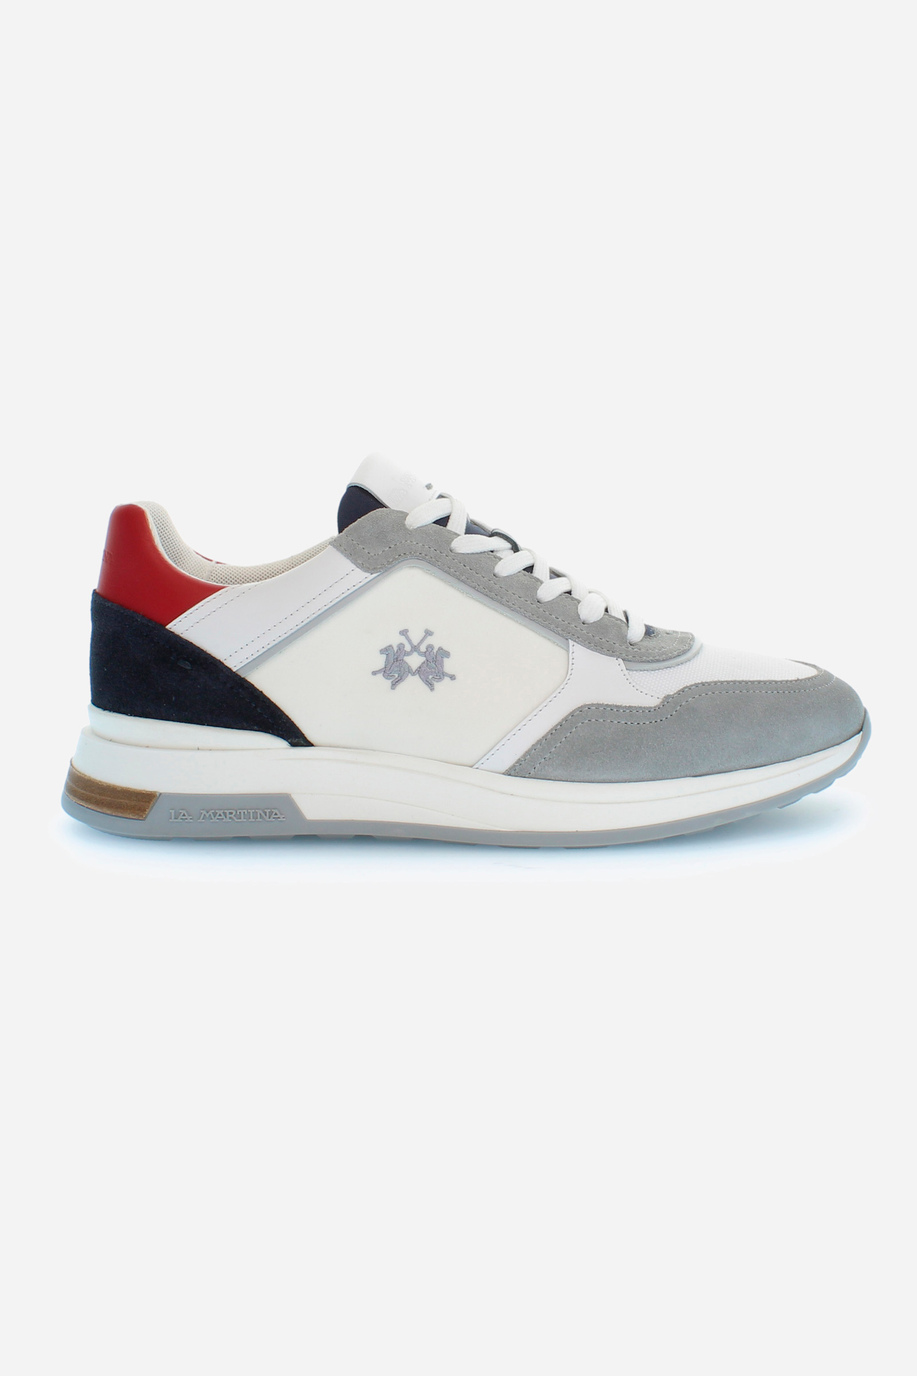 Men's trainers with raised sole in canvas and suede - Footwear | La Martina - Official Online Shop